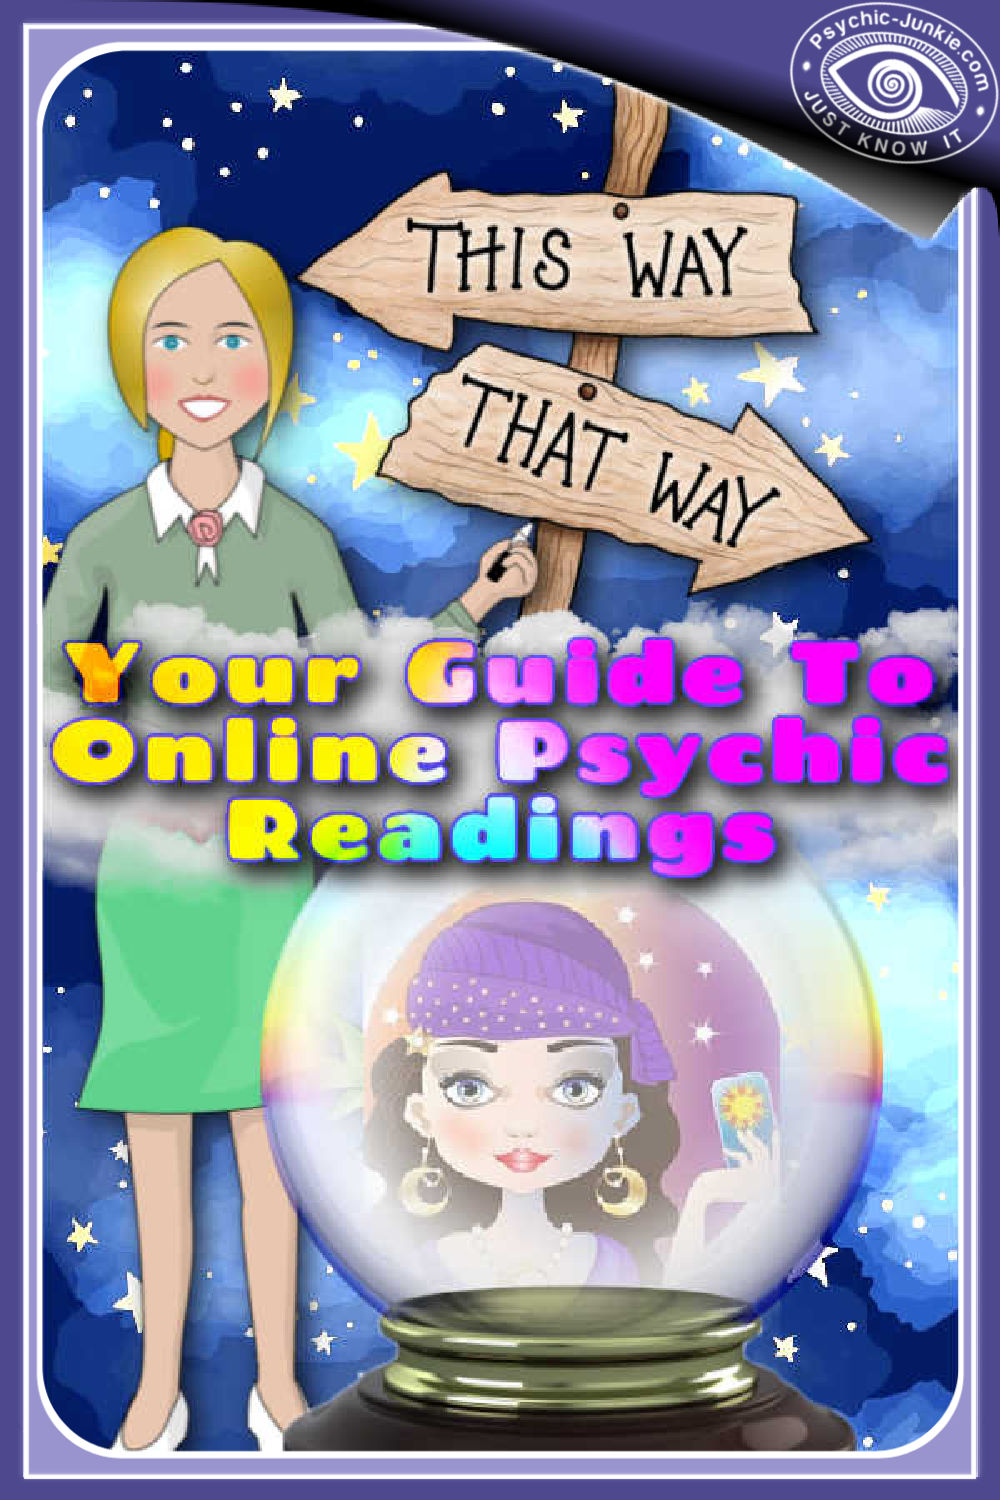 The Complete Guide To Online Psychic Readings